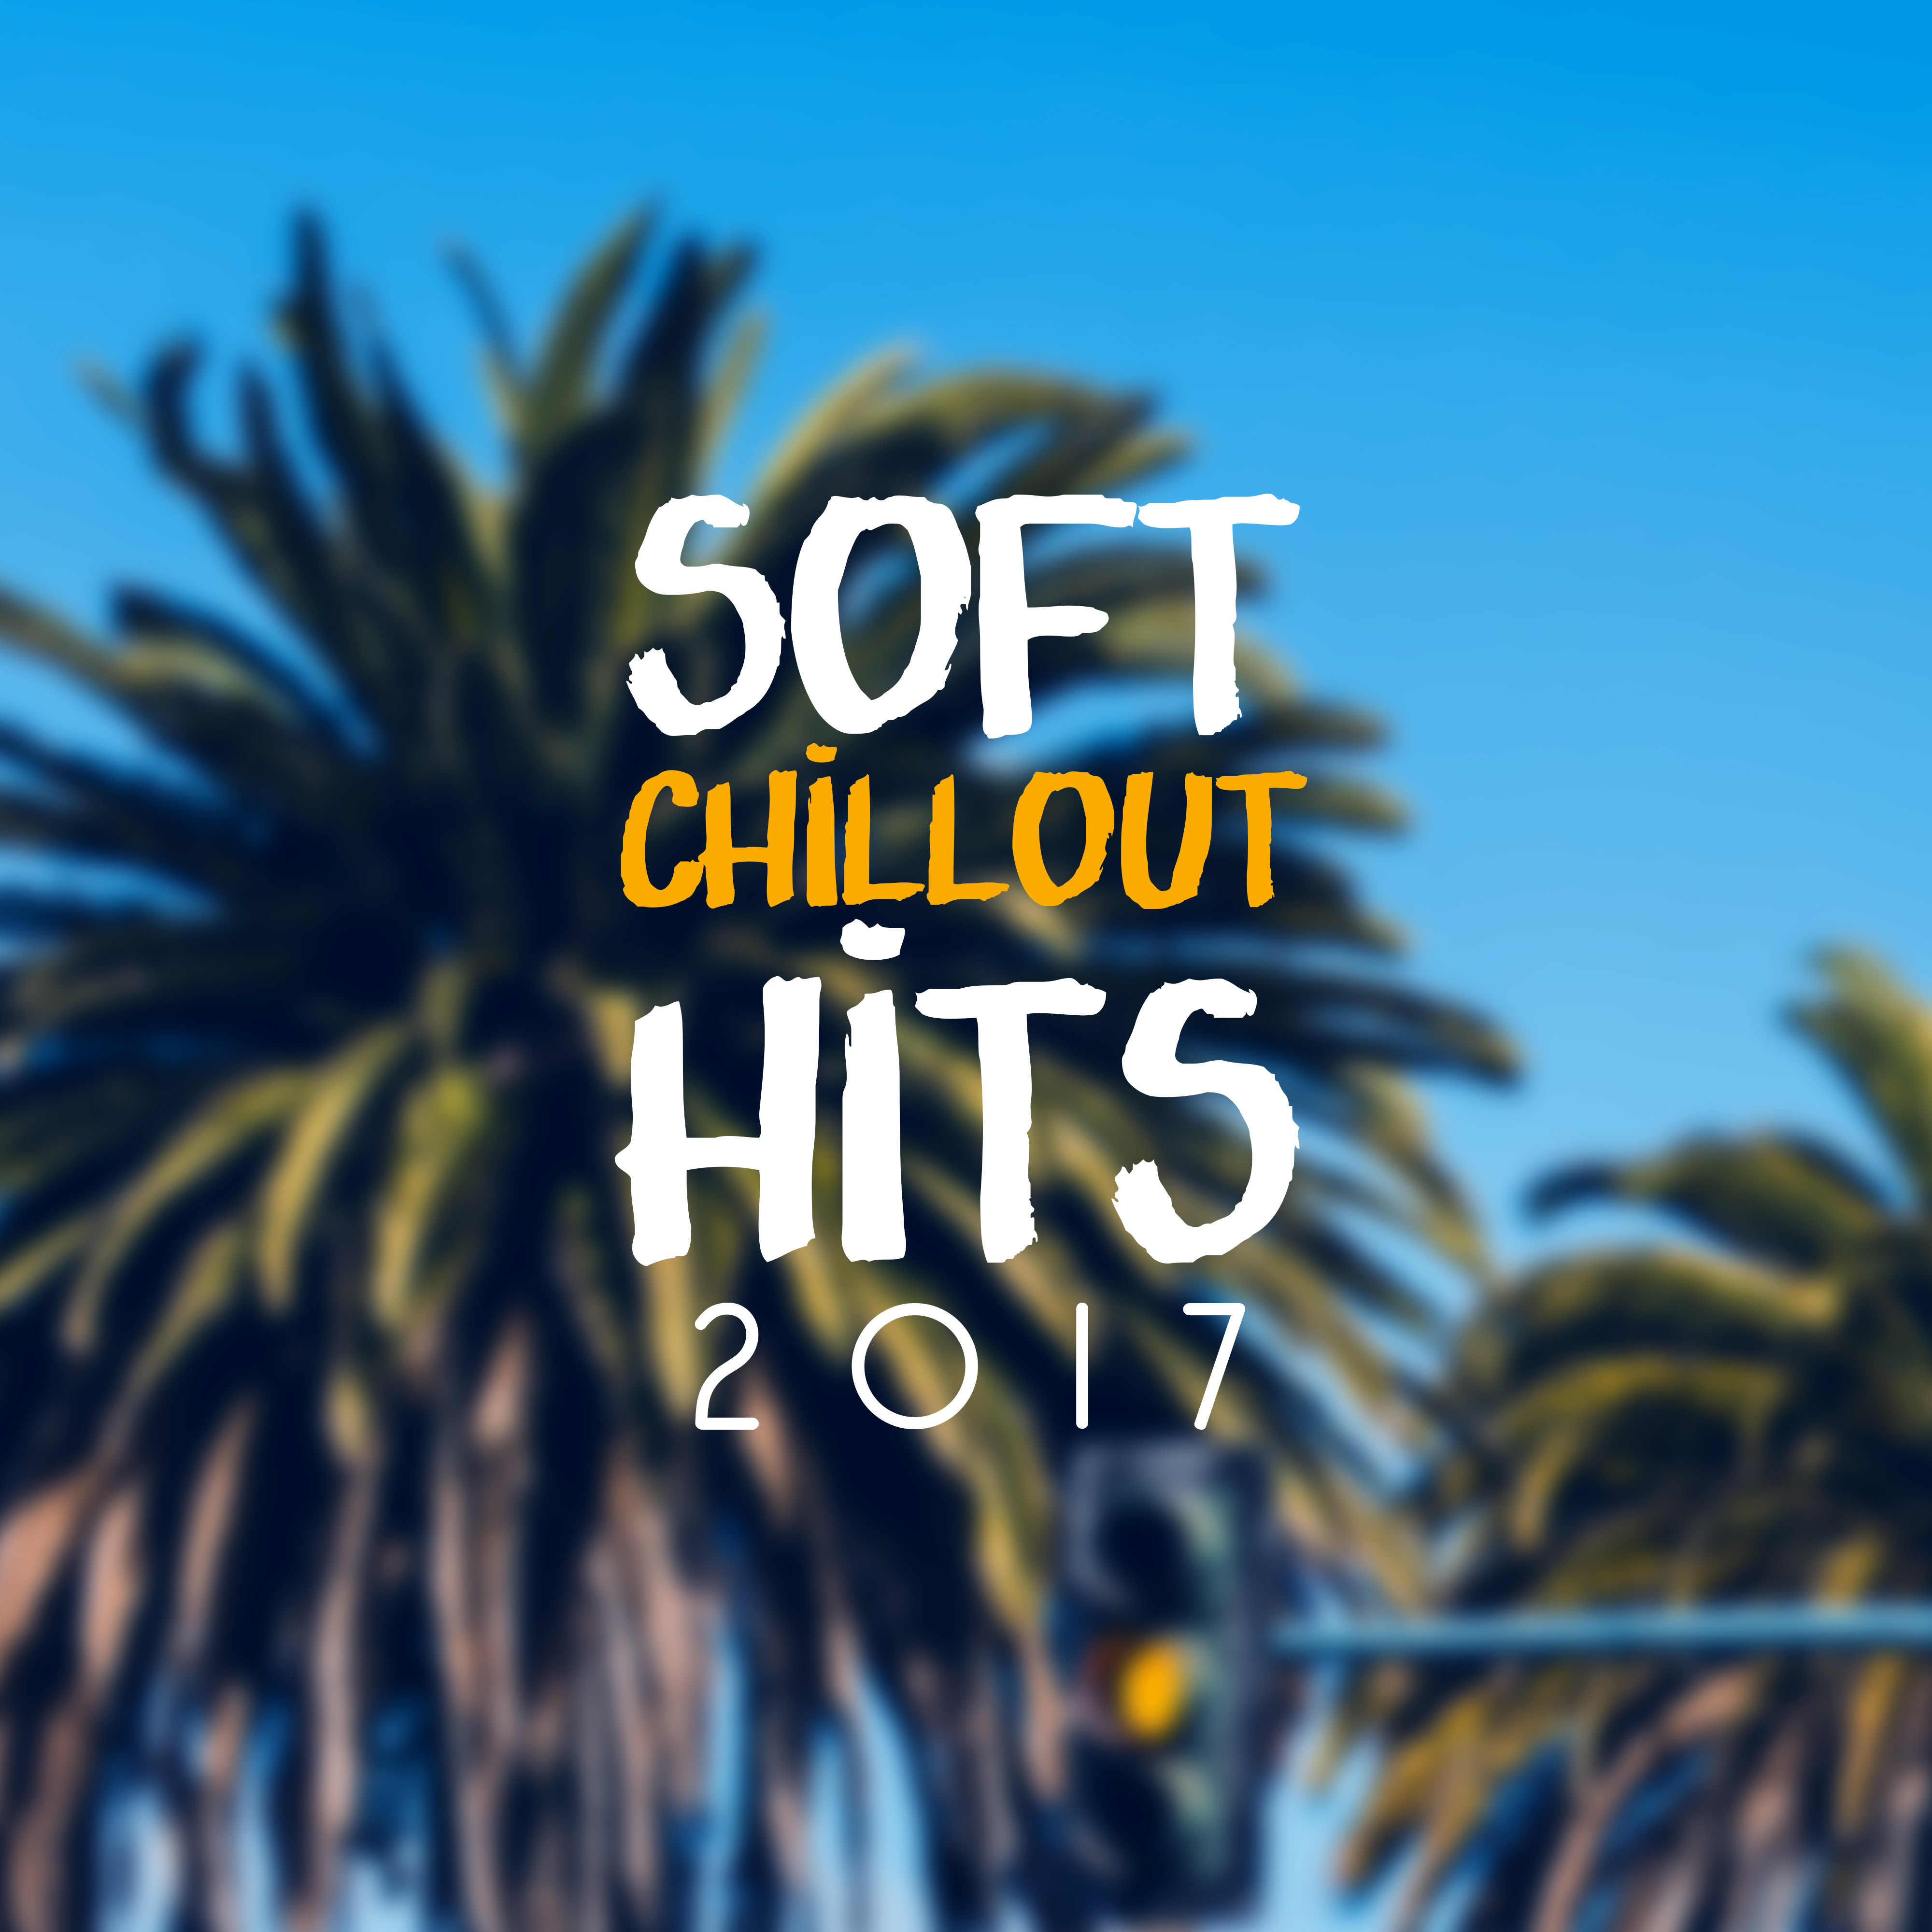 Soft Chillout Hits 2017  Sensual Vibes, Relaxing Music, Chill Out 2017, Ambient Lounge